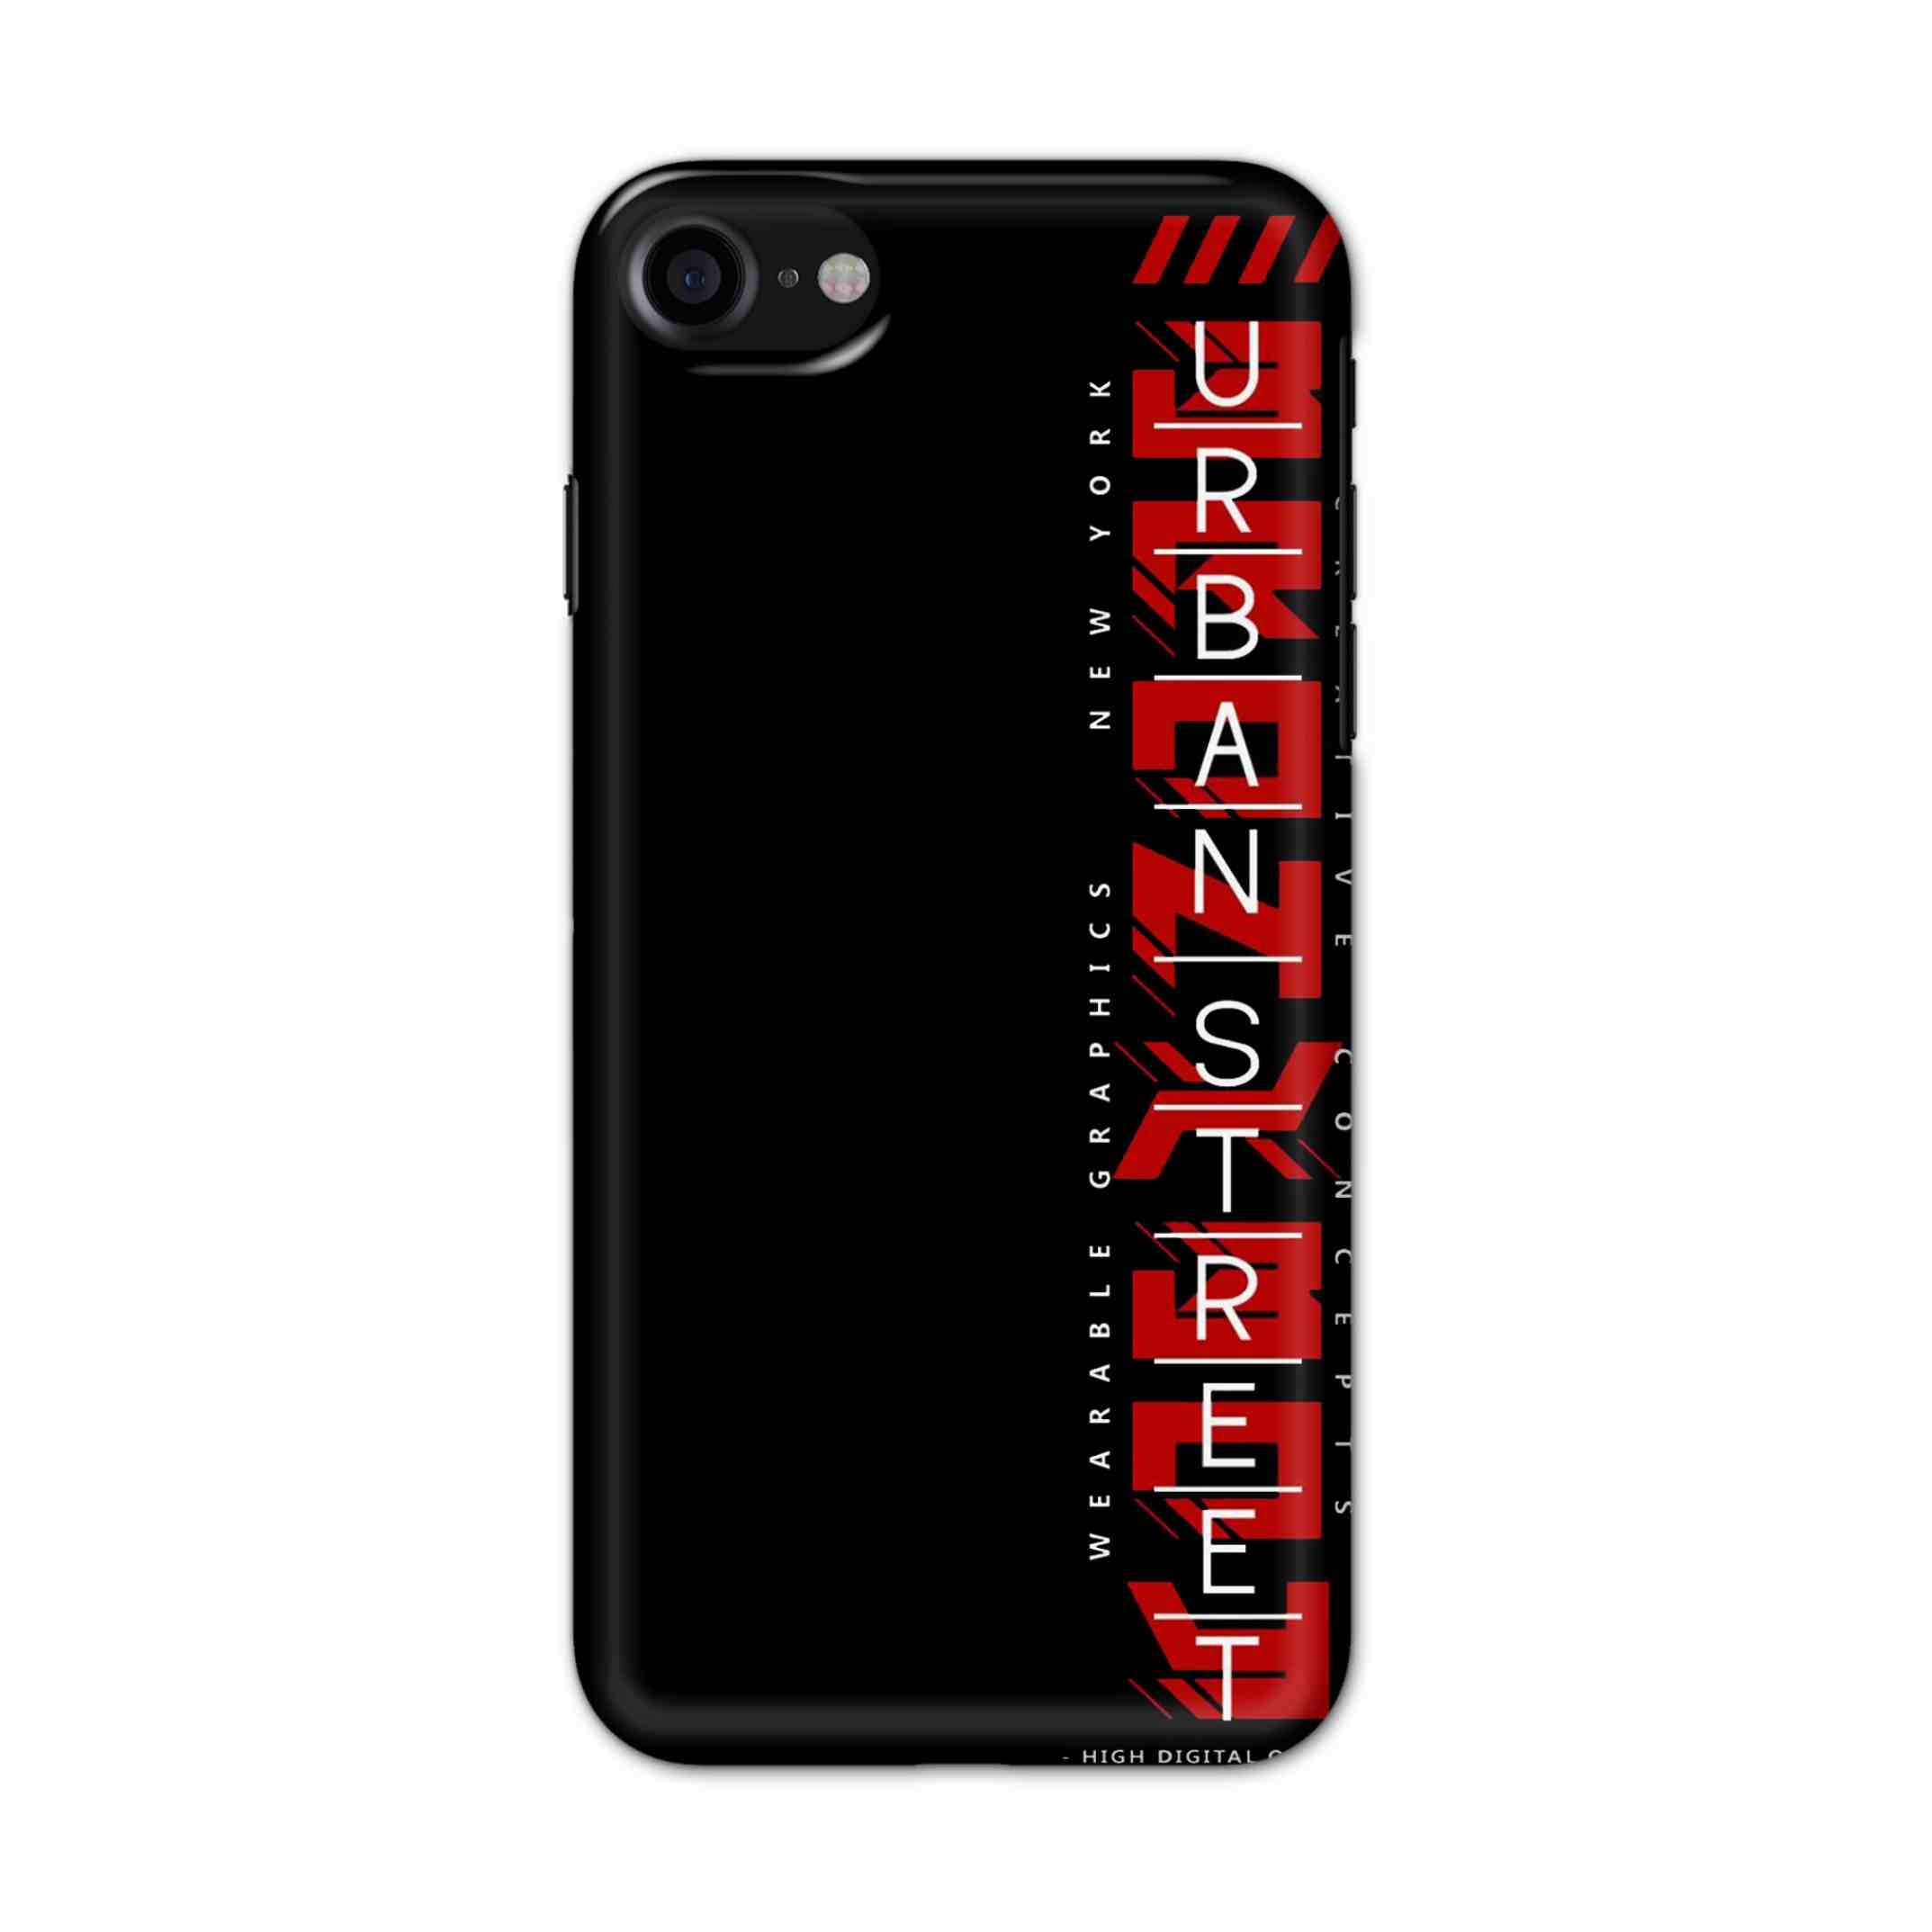 Buy Urban Street Hard Back Mobile Phone Case/Cover For iPhone 7 / 8 Online